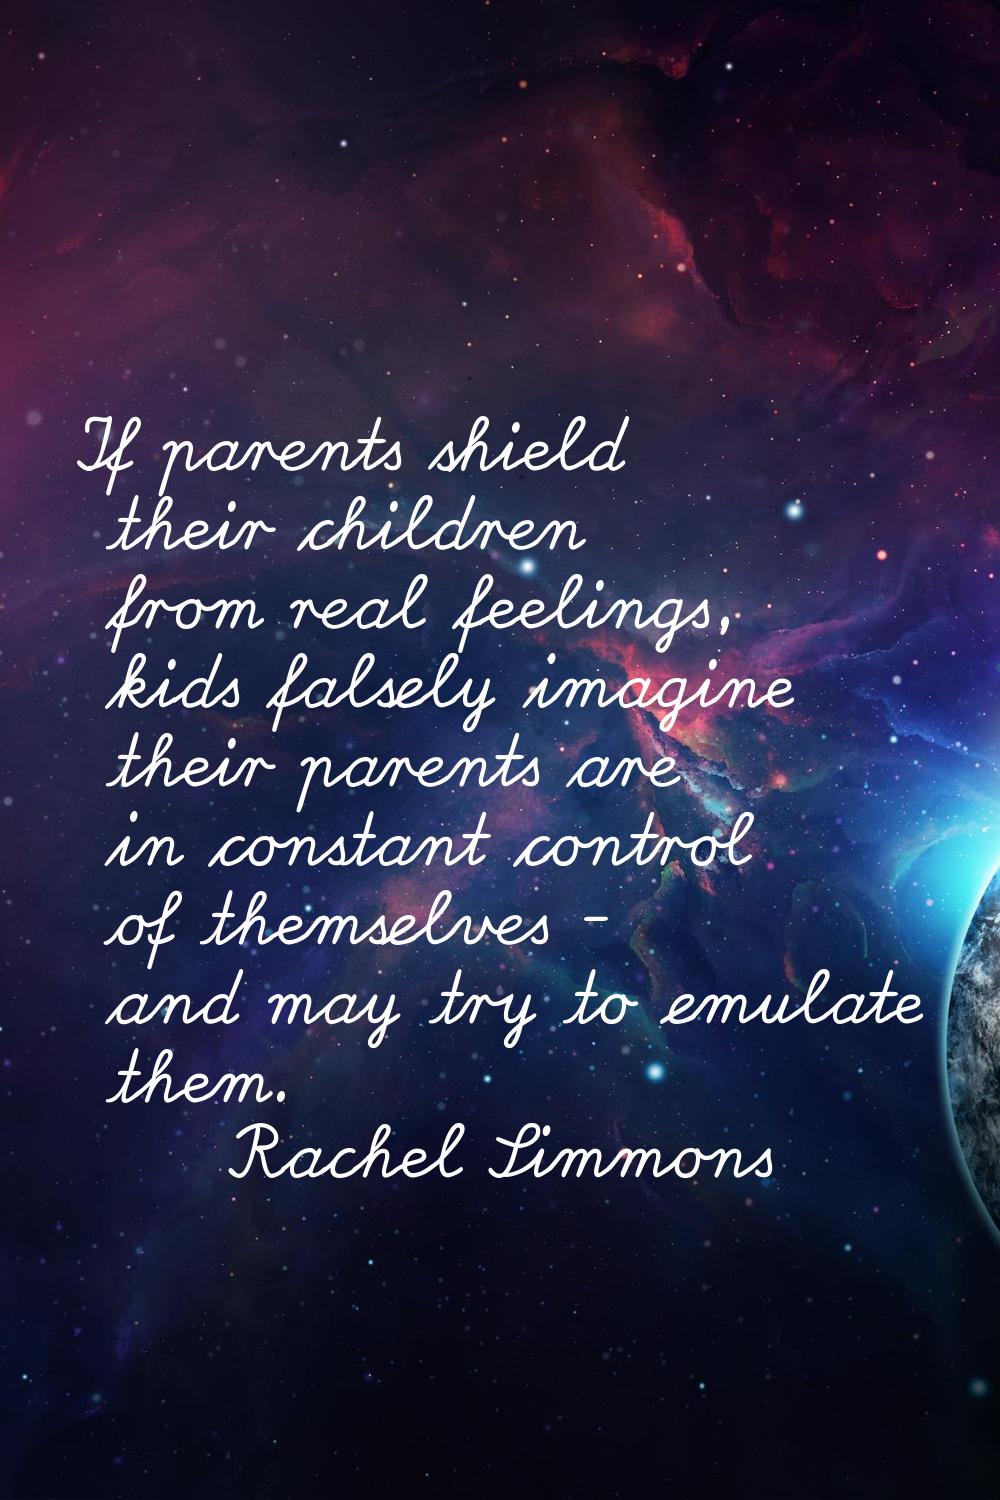 If parents shield their children from real feelings, kids falsely imagine their parents are in cons